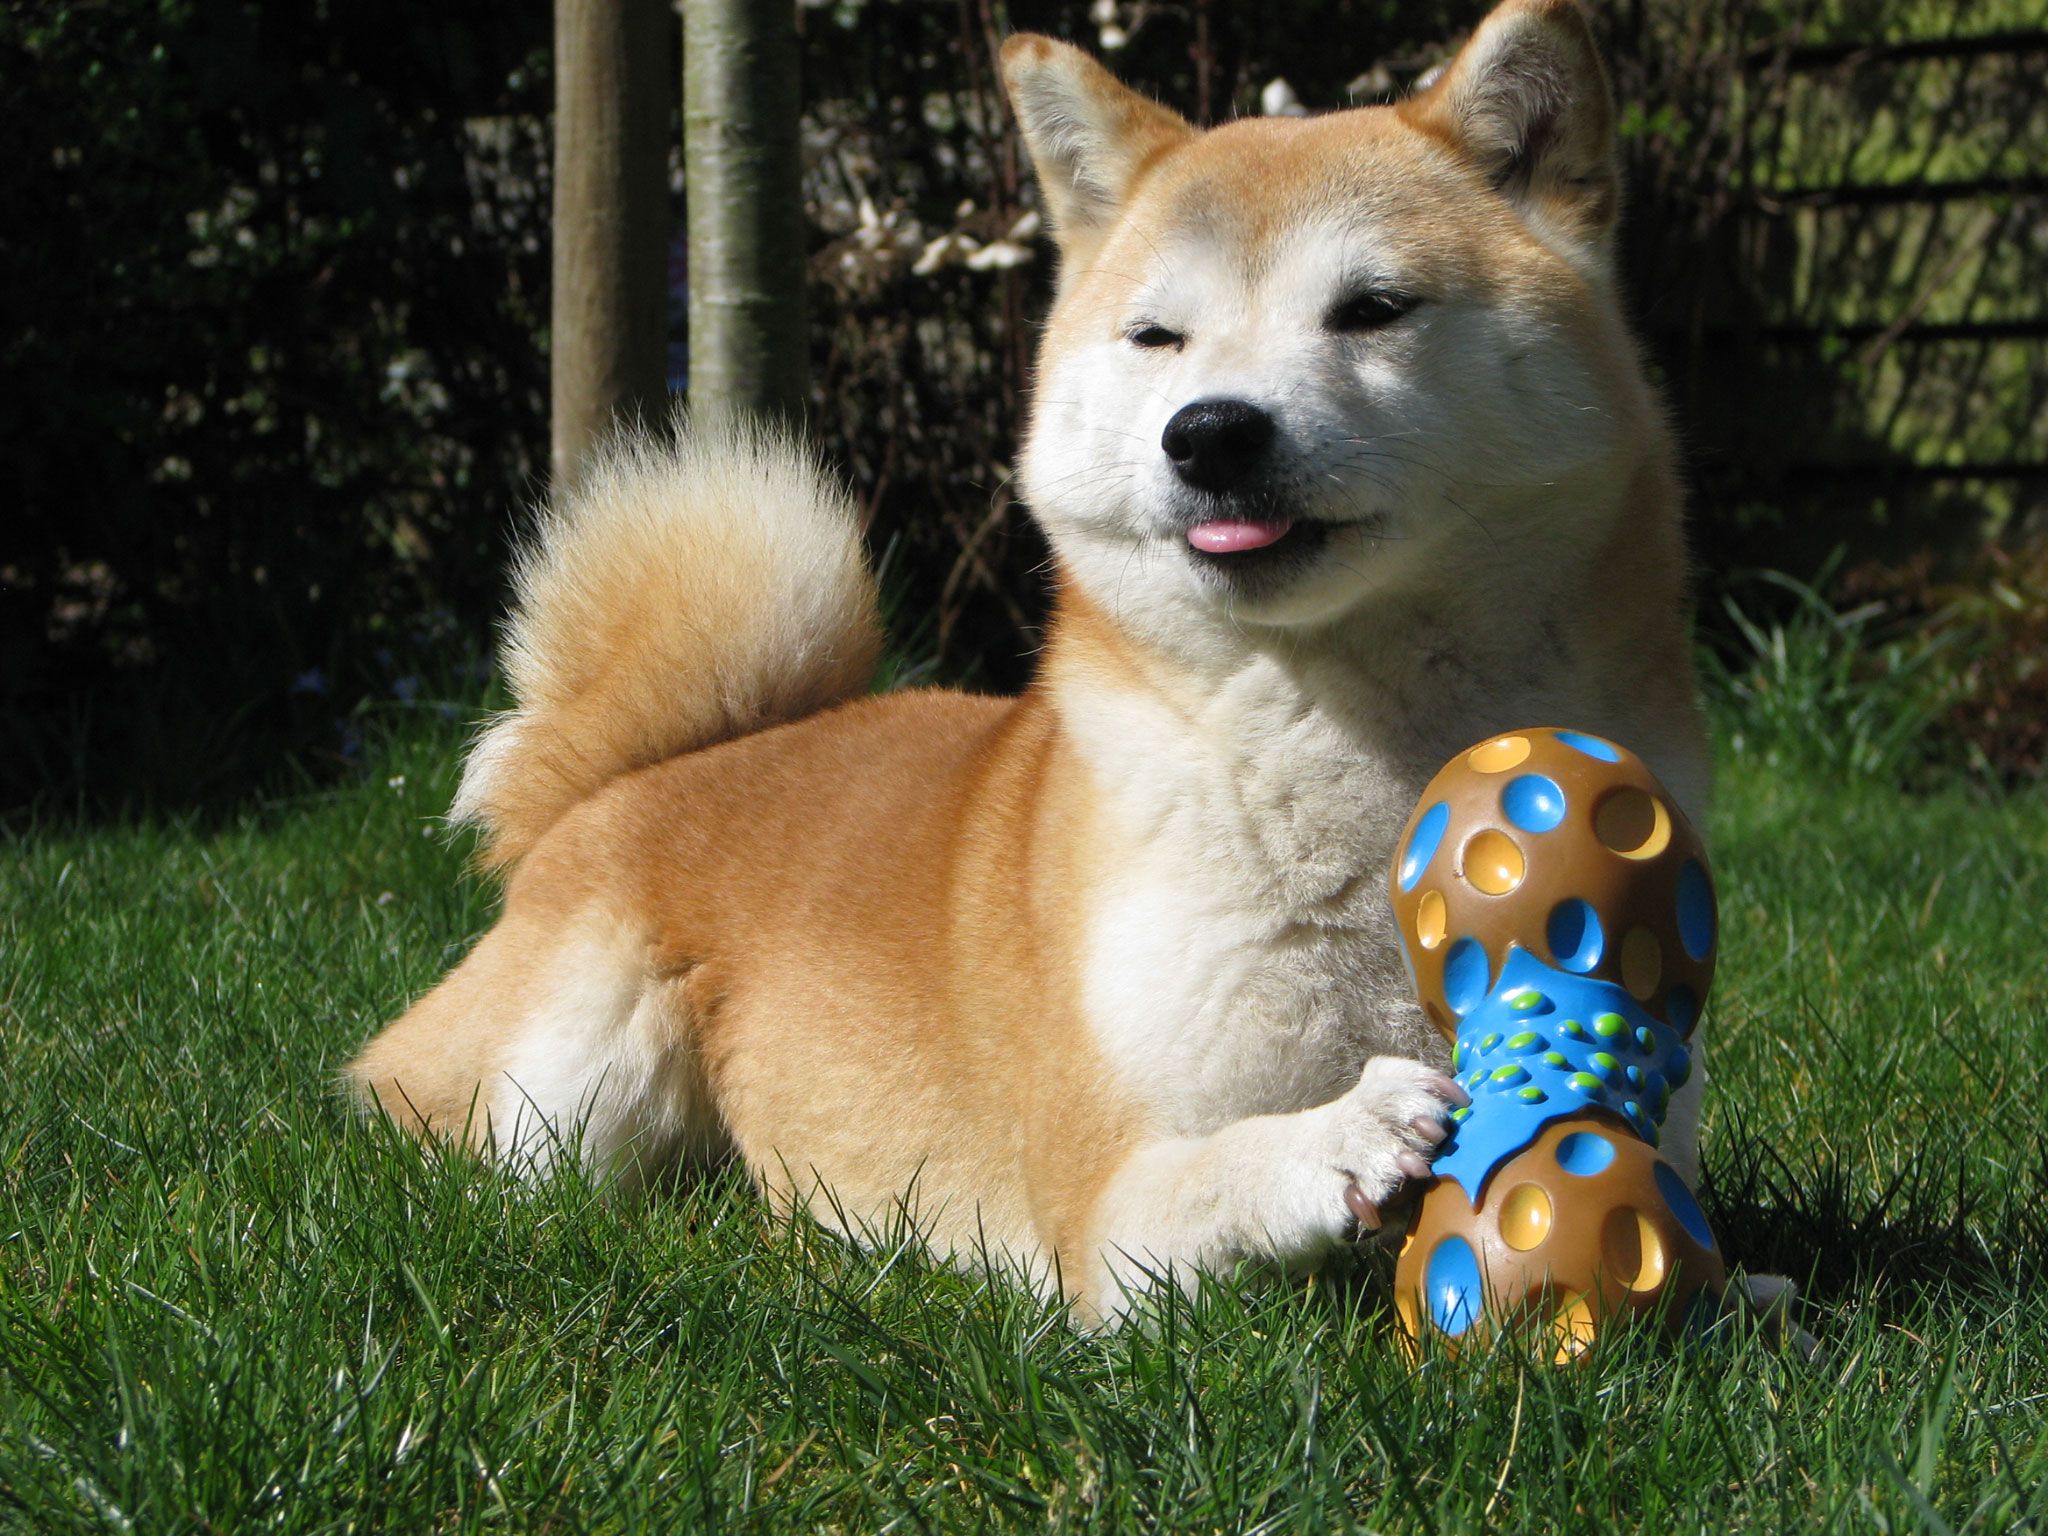 shiba_inu_dog_is_playing_with_toy_wallpaper.jpg